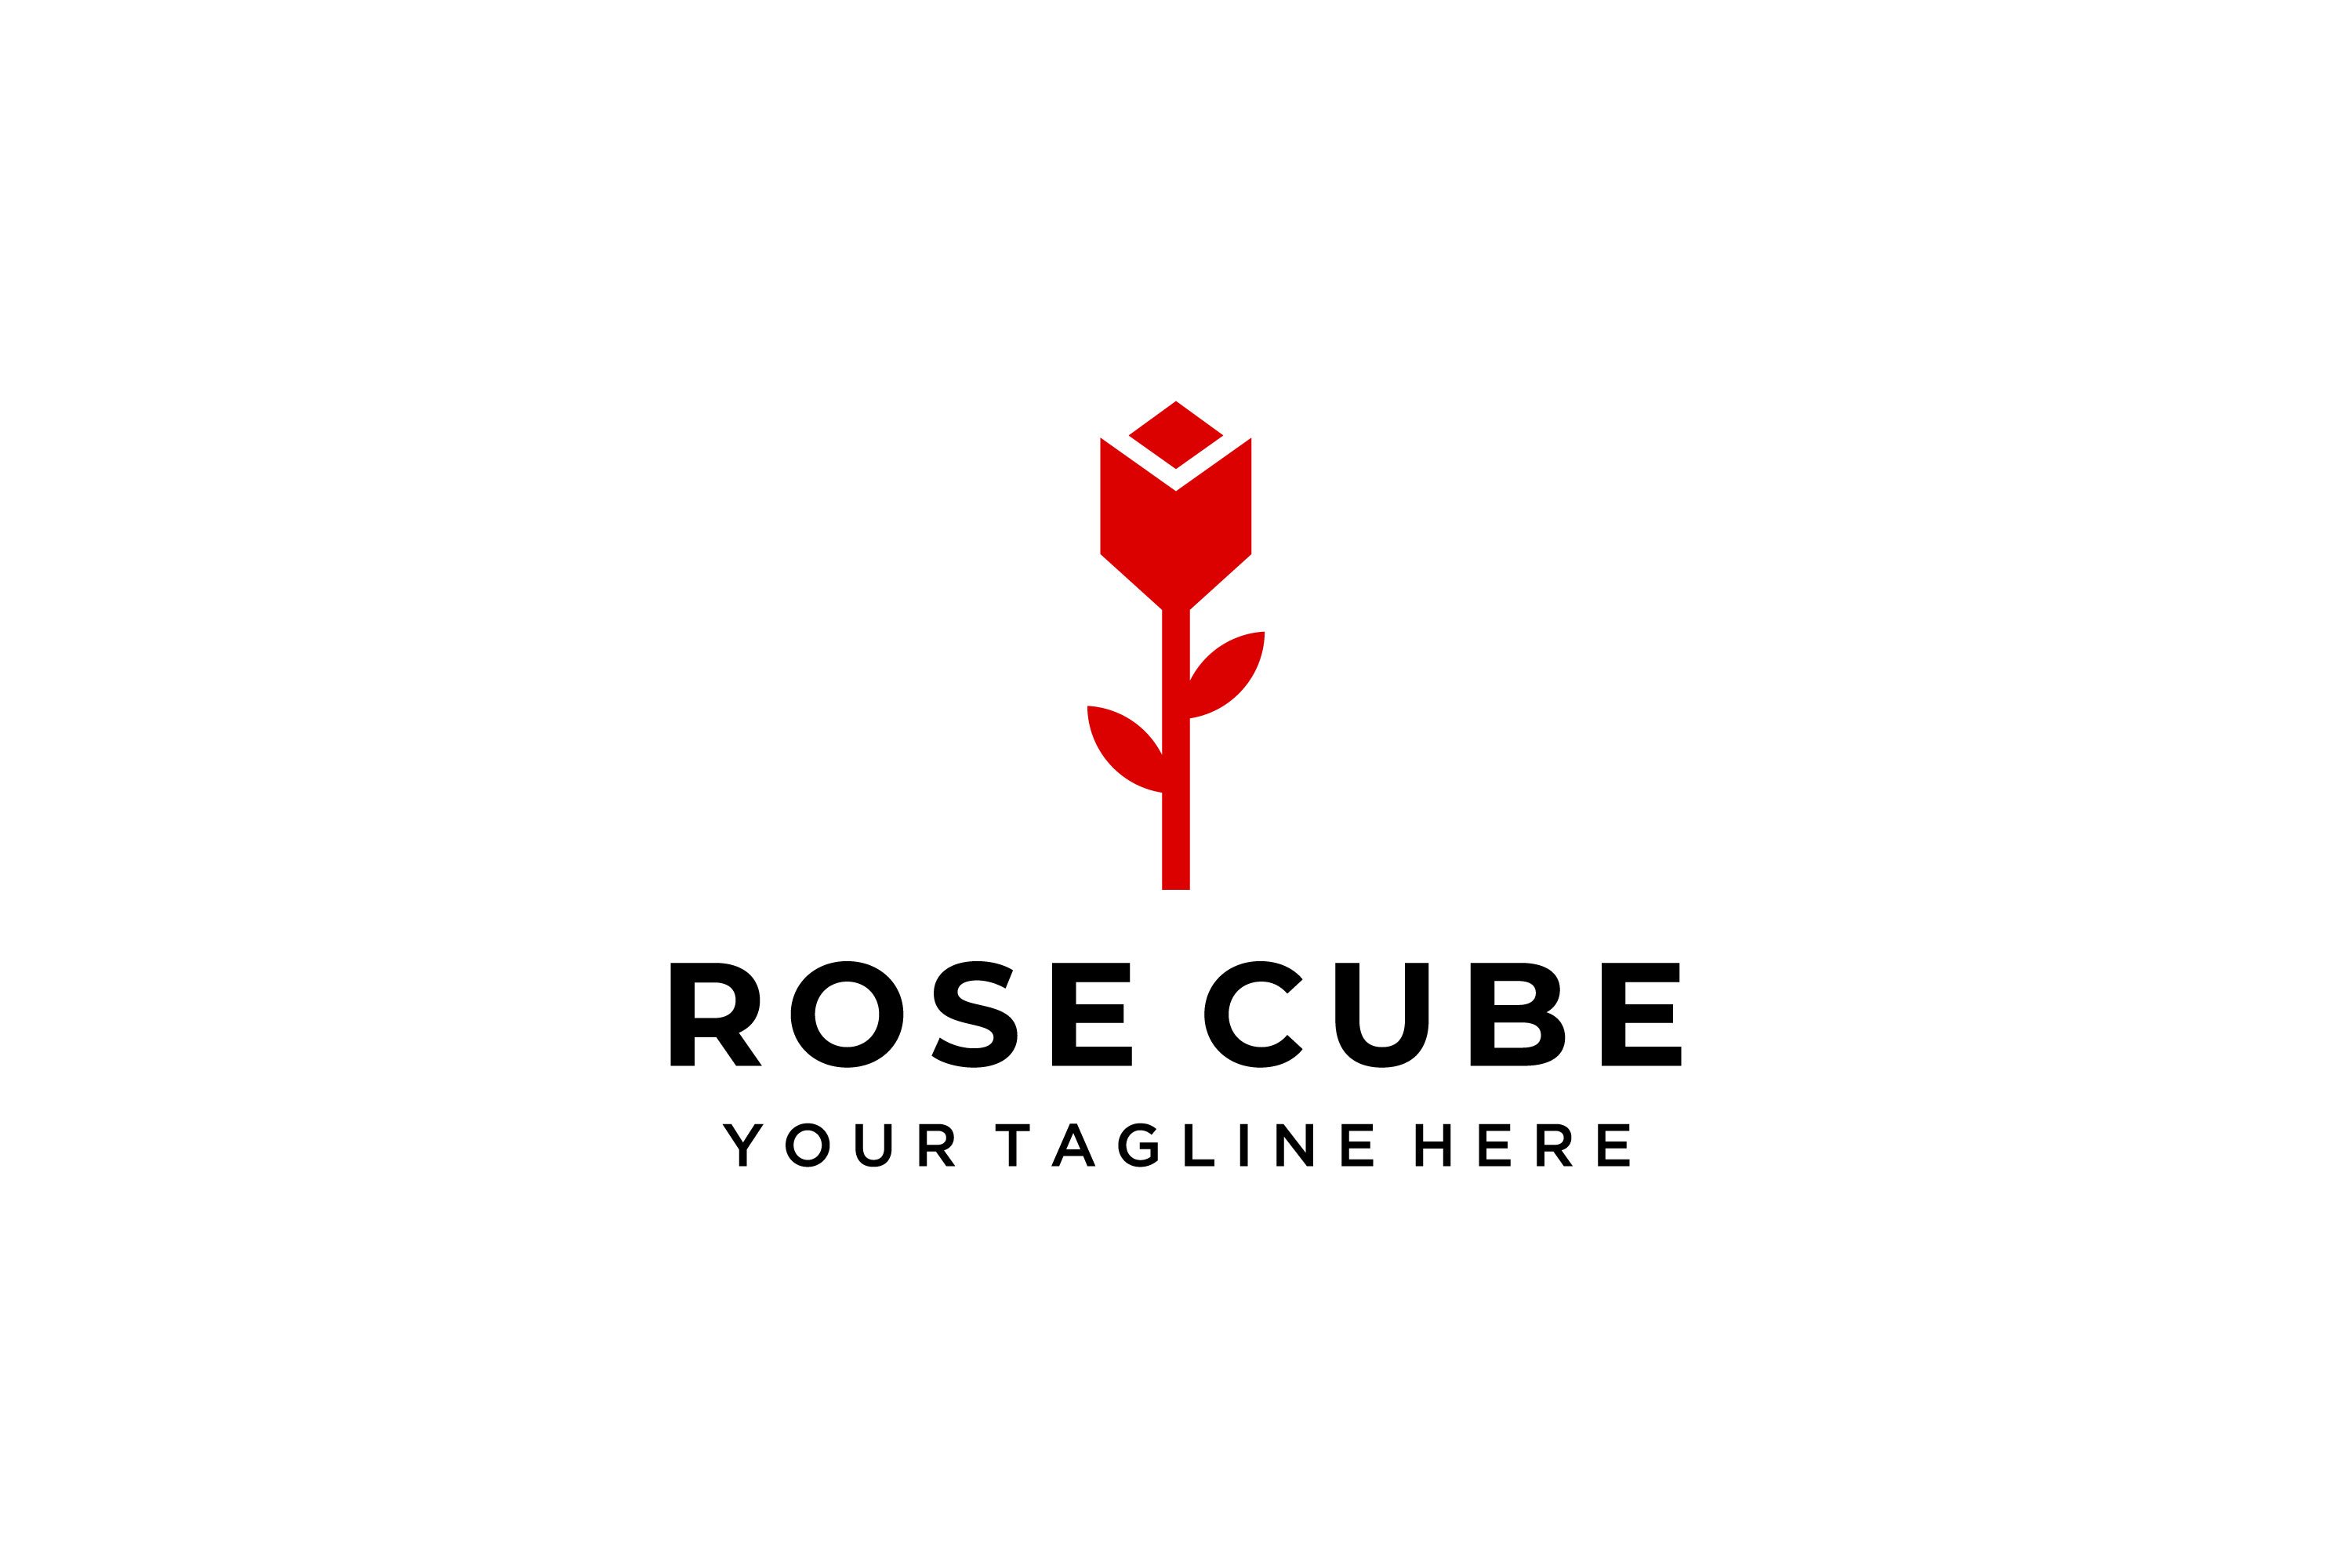 Beauty Rose with cube geometric logo cover image.